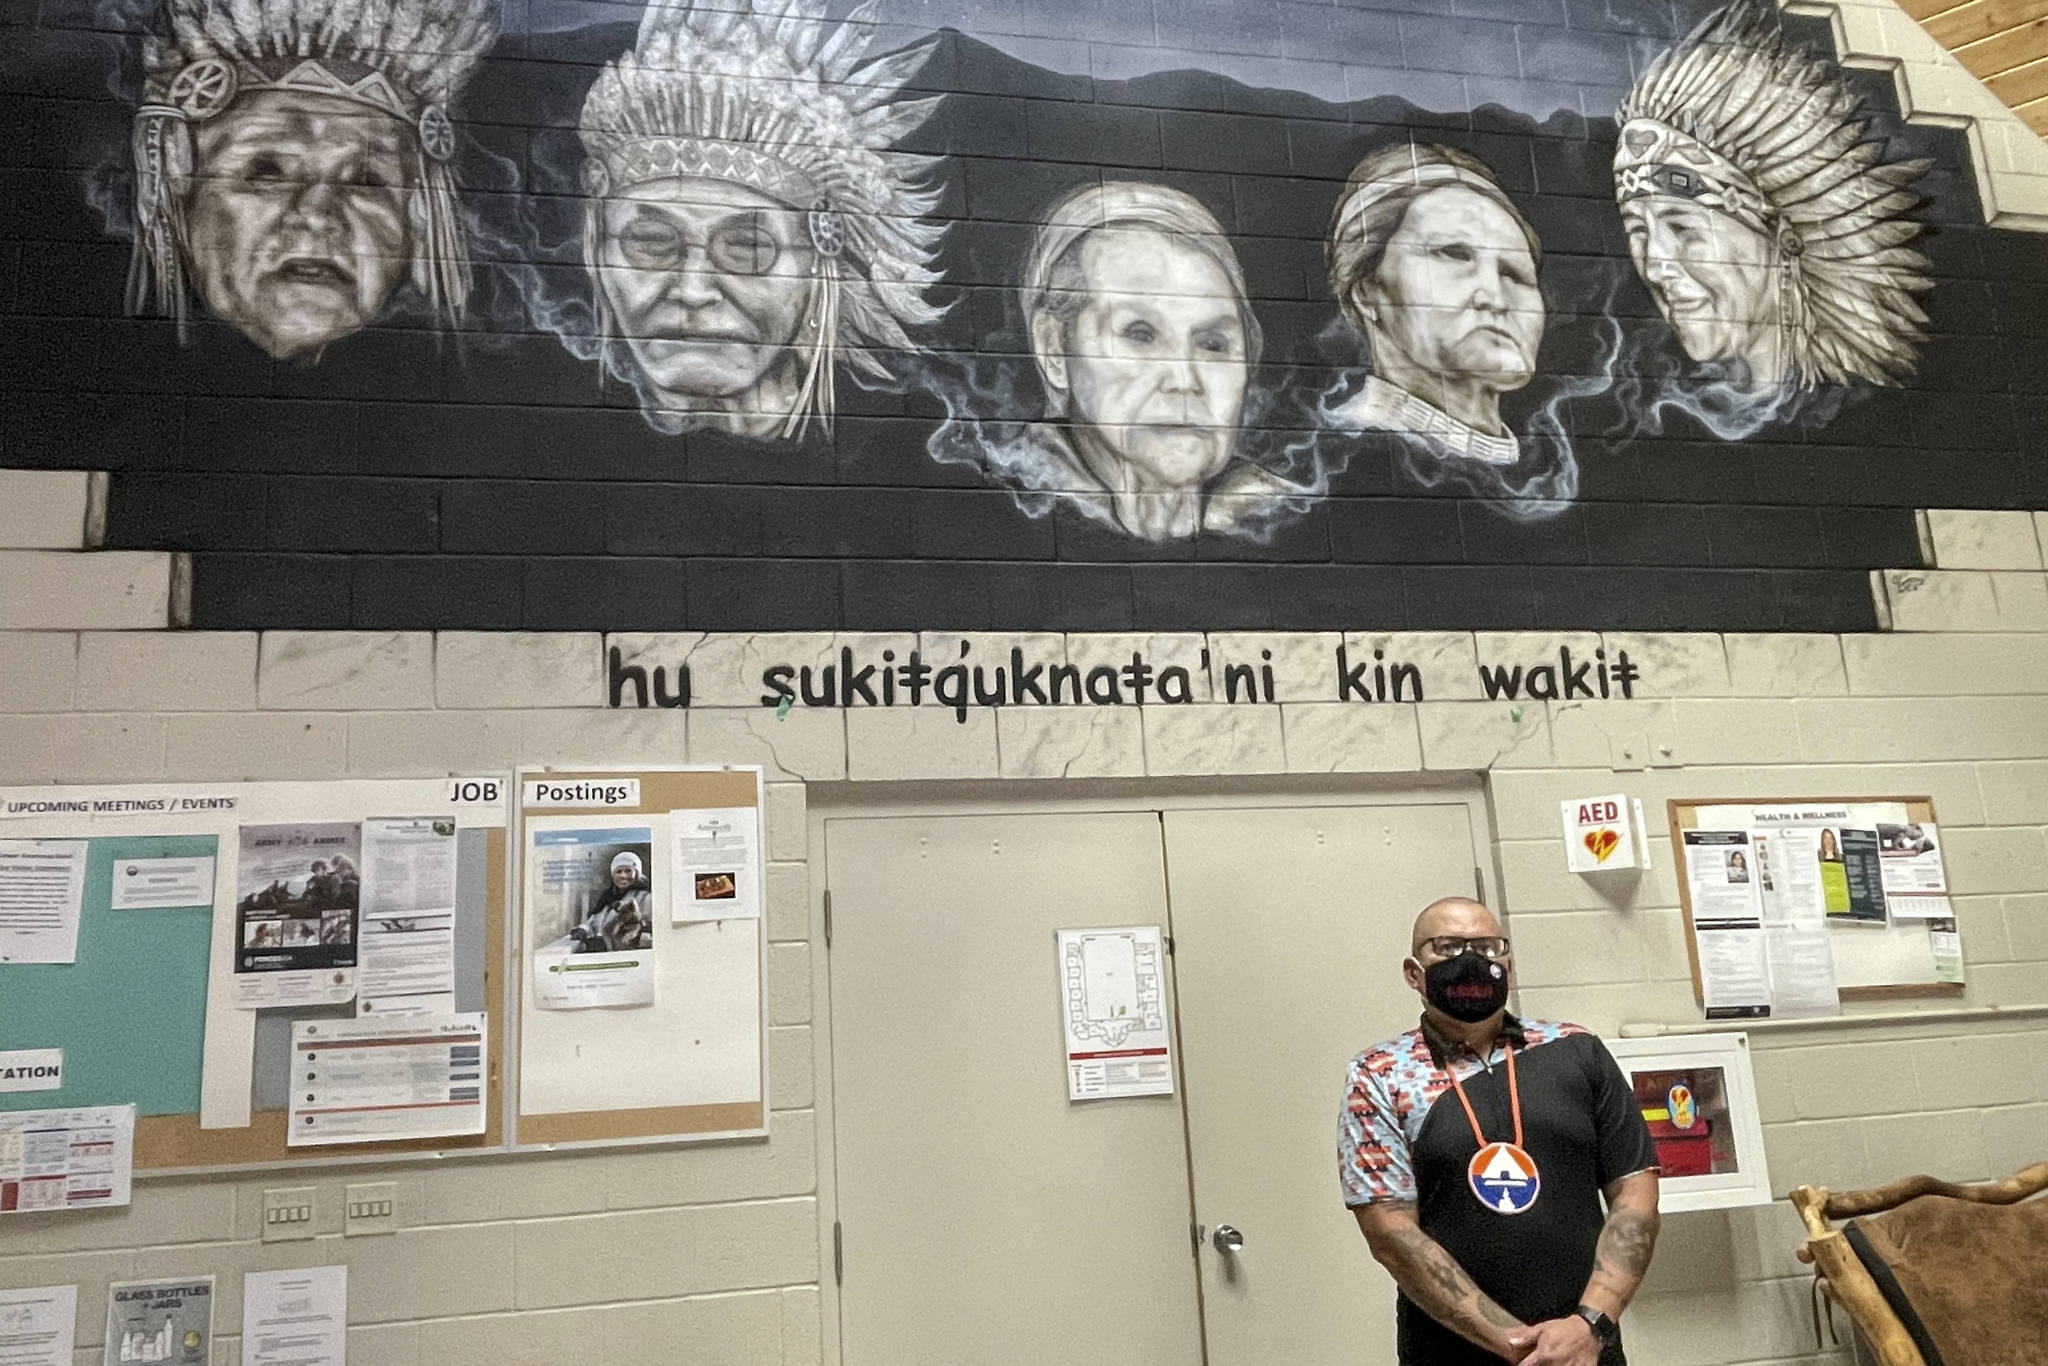 Nasukin Jason Louie of the Lower Kootenay Band poses under the mural in the administration building. The mural depicts past elders David Luke, Wilfred Jacobs, Isobel Louie, Charlotte Basil, and Louis White. (Photo by Kelsey Yates)